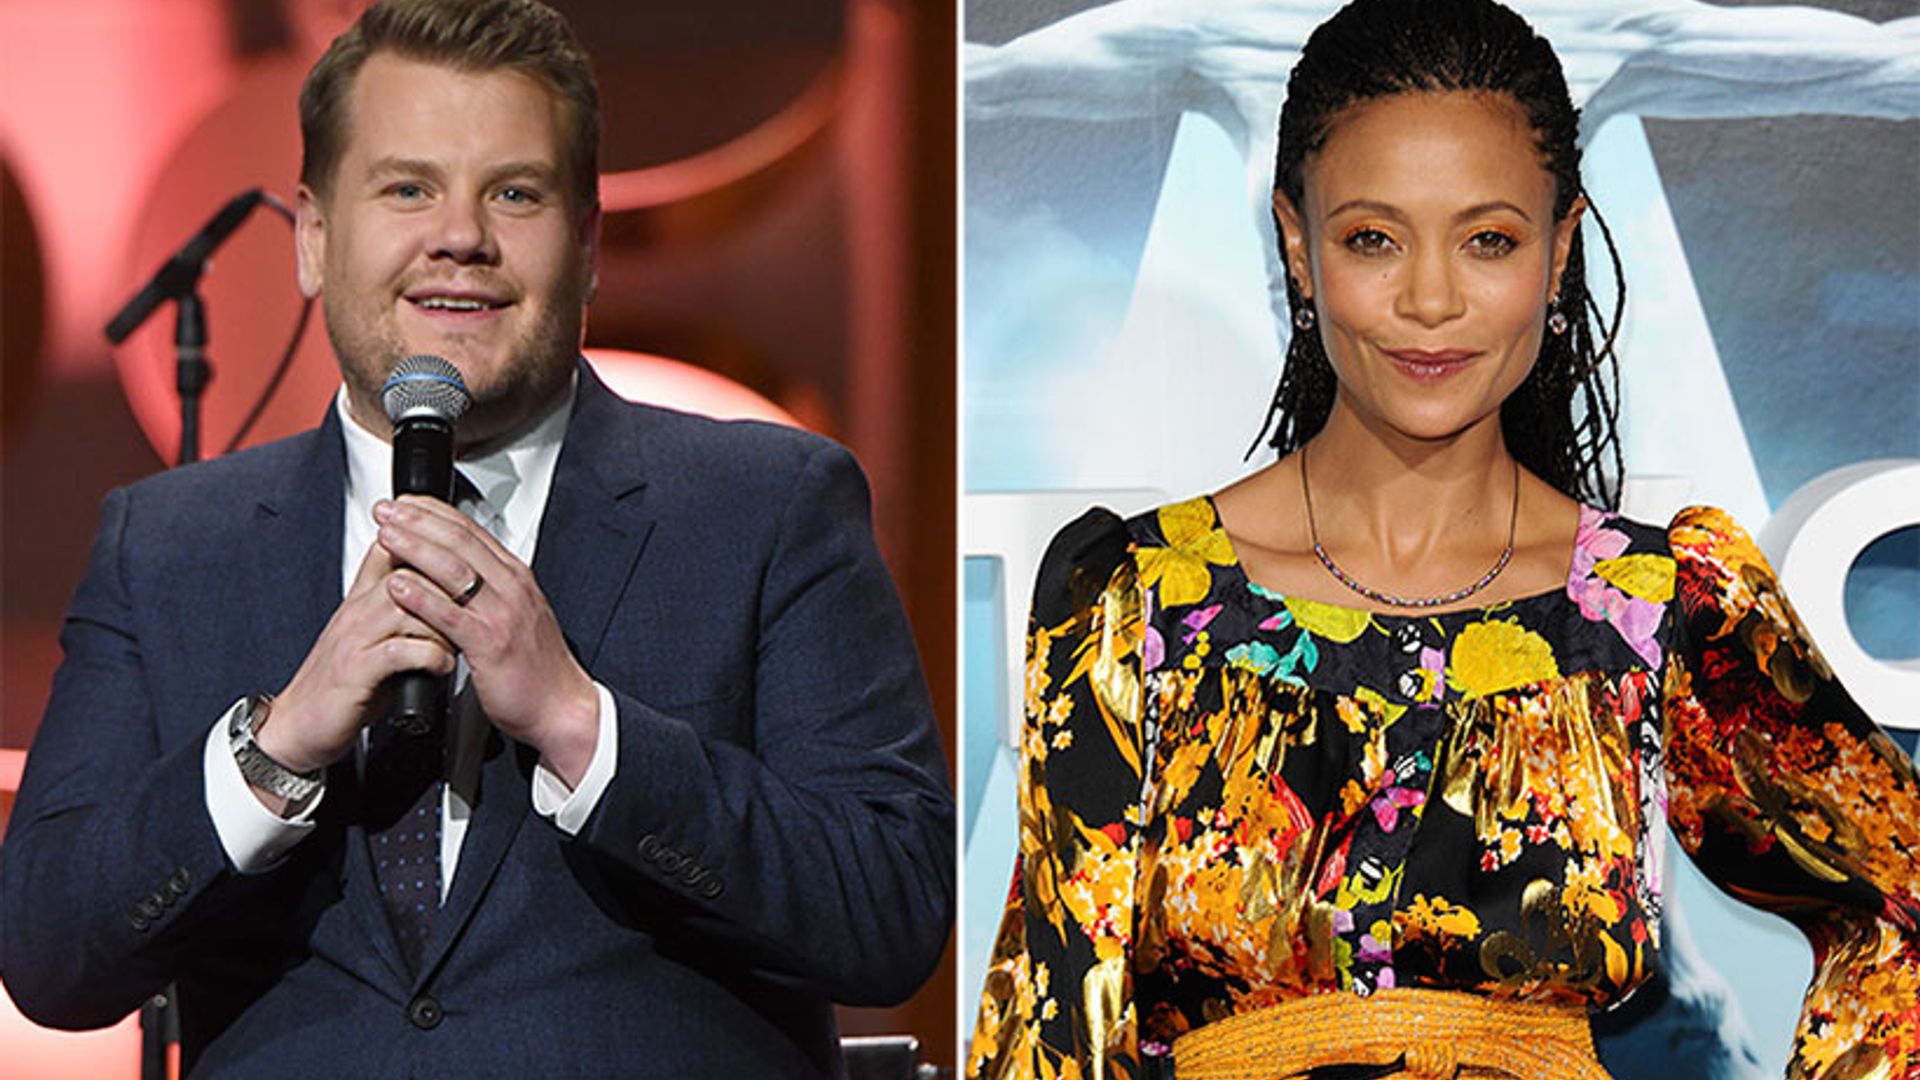 James Corden and Thandie Newton scoop Critic's Choice Awards